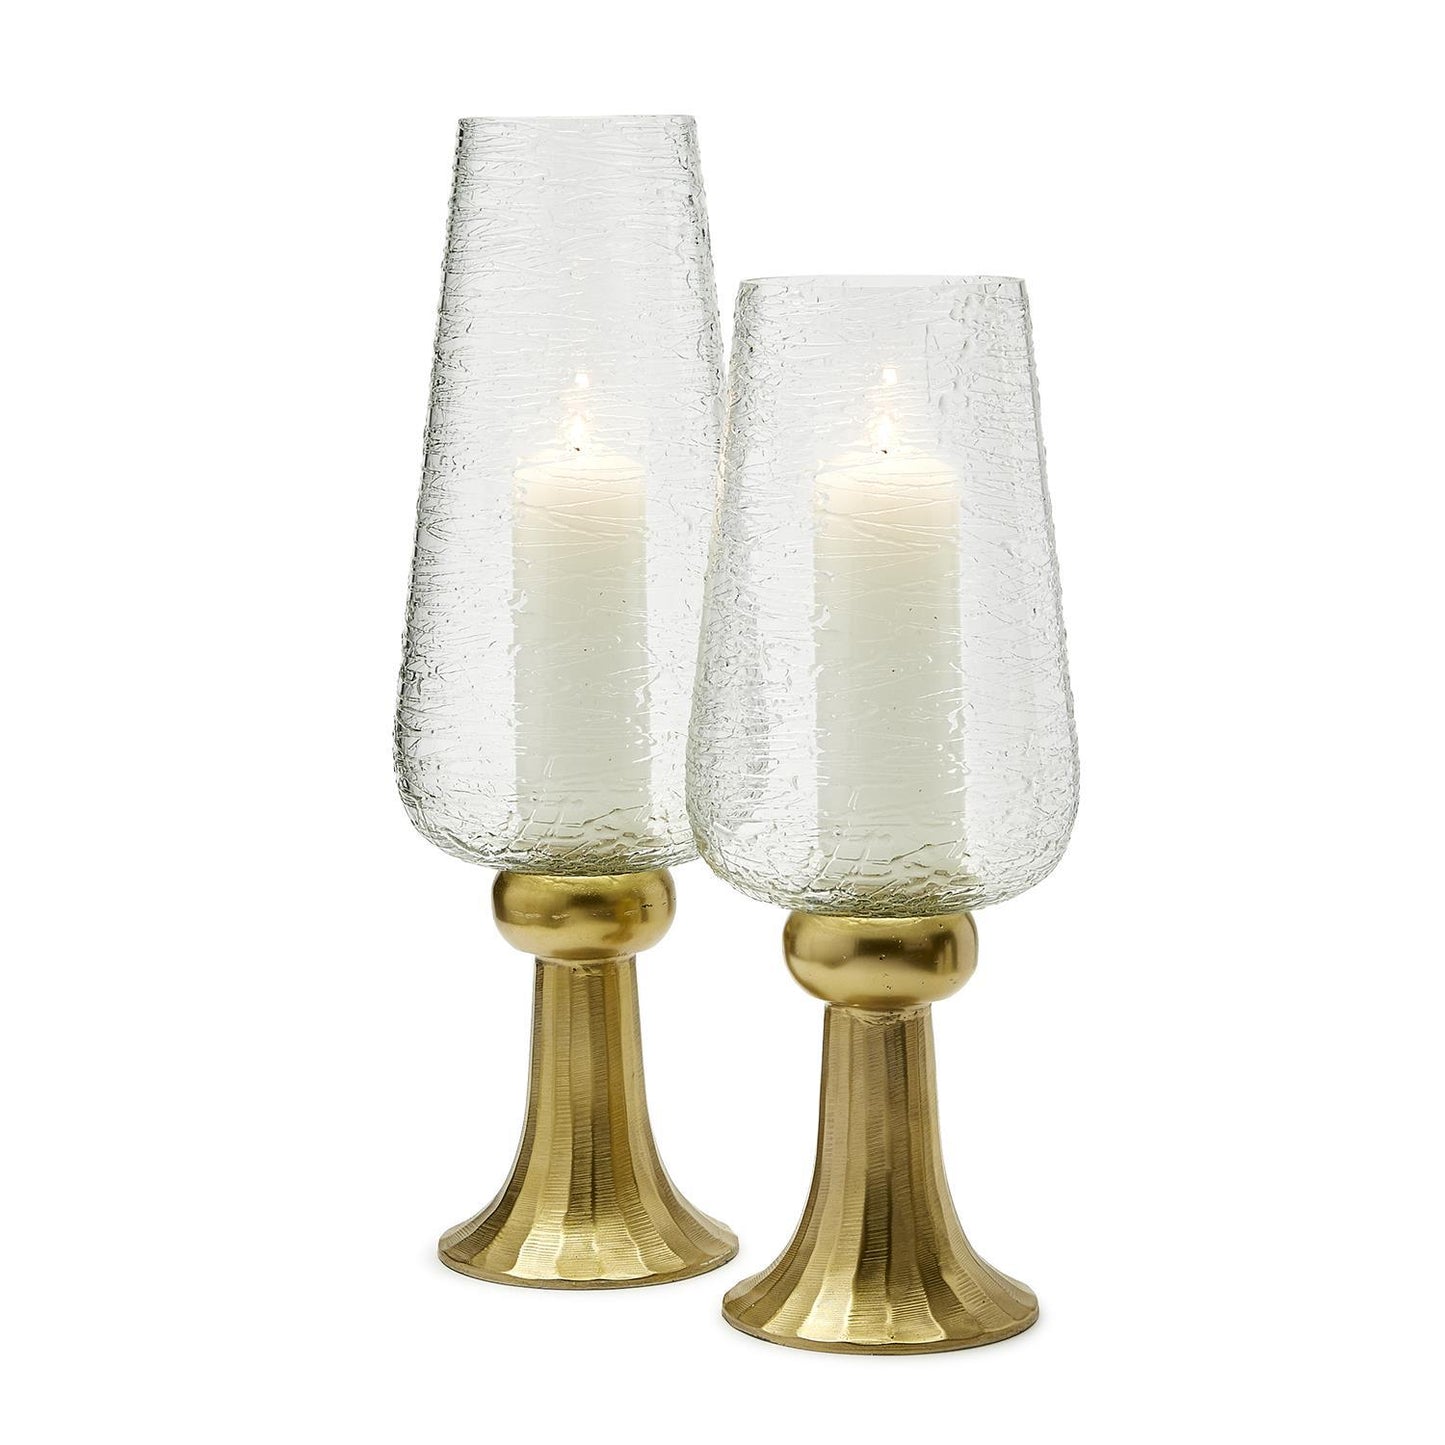 Highlights Set of 2 Glass Candle Holder with Icicle Effect on Golden Etched Base